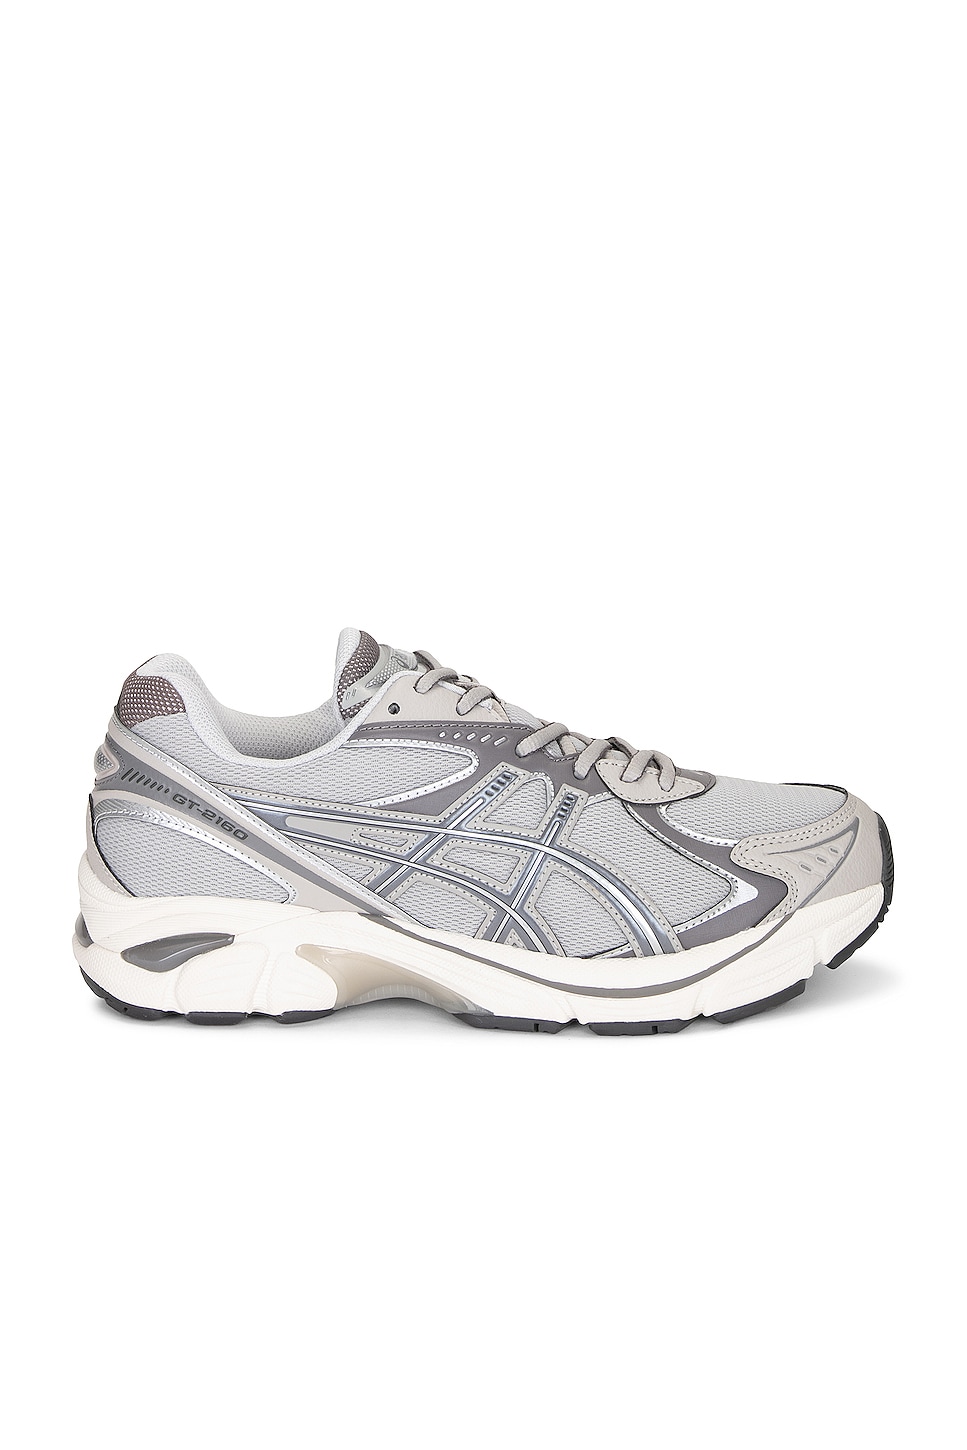 Image 1 of Asics Gt-2160 Sneaker in Oyster Grey & Carbon